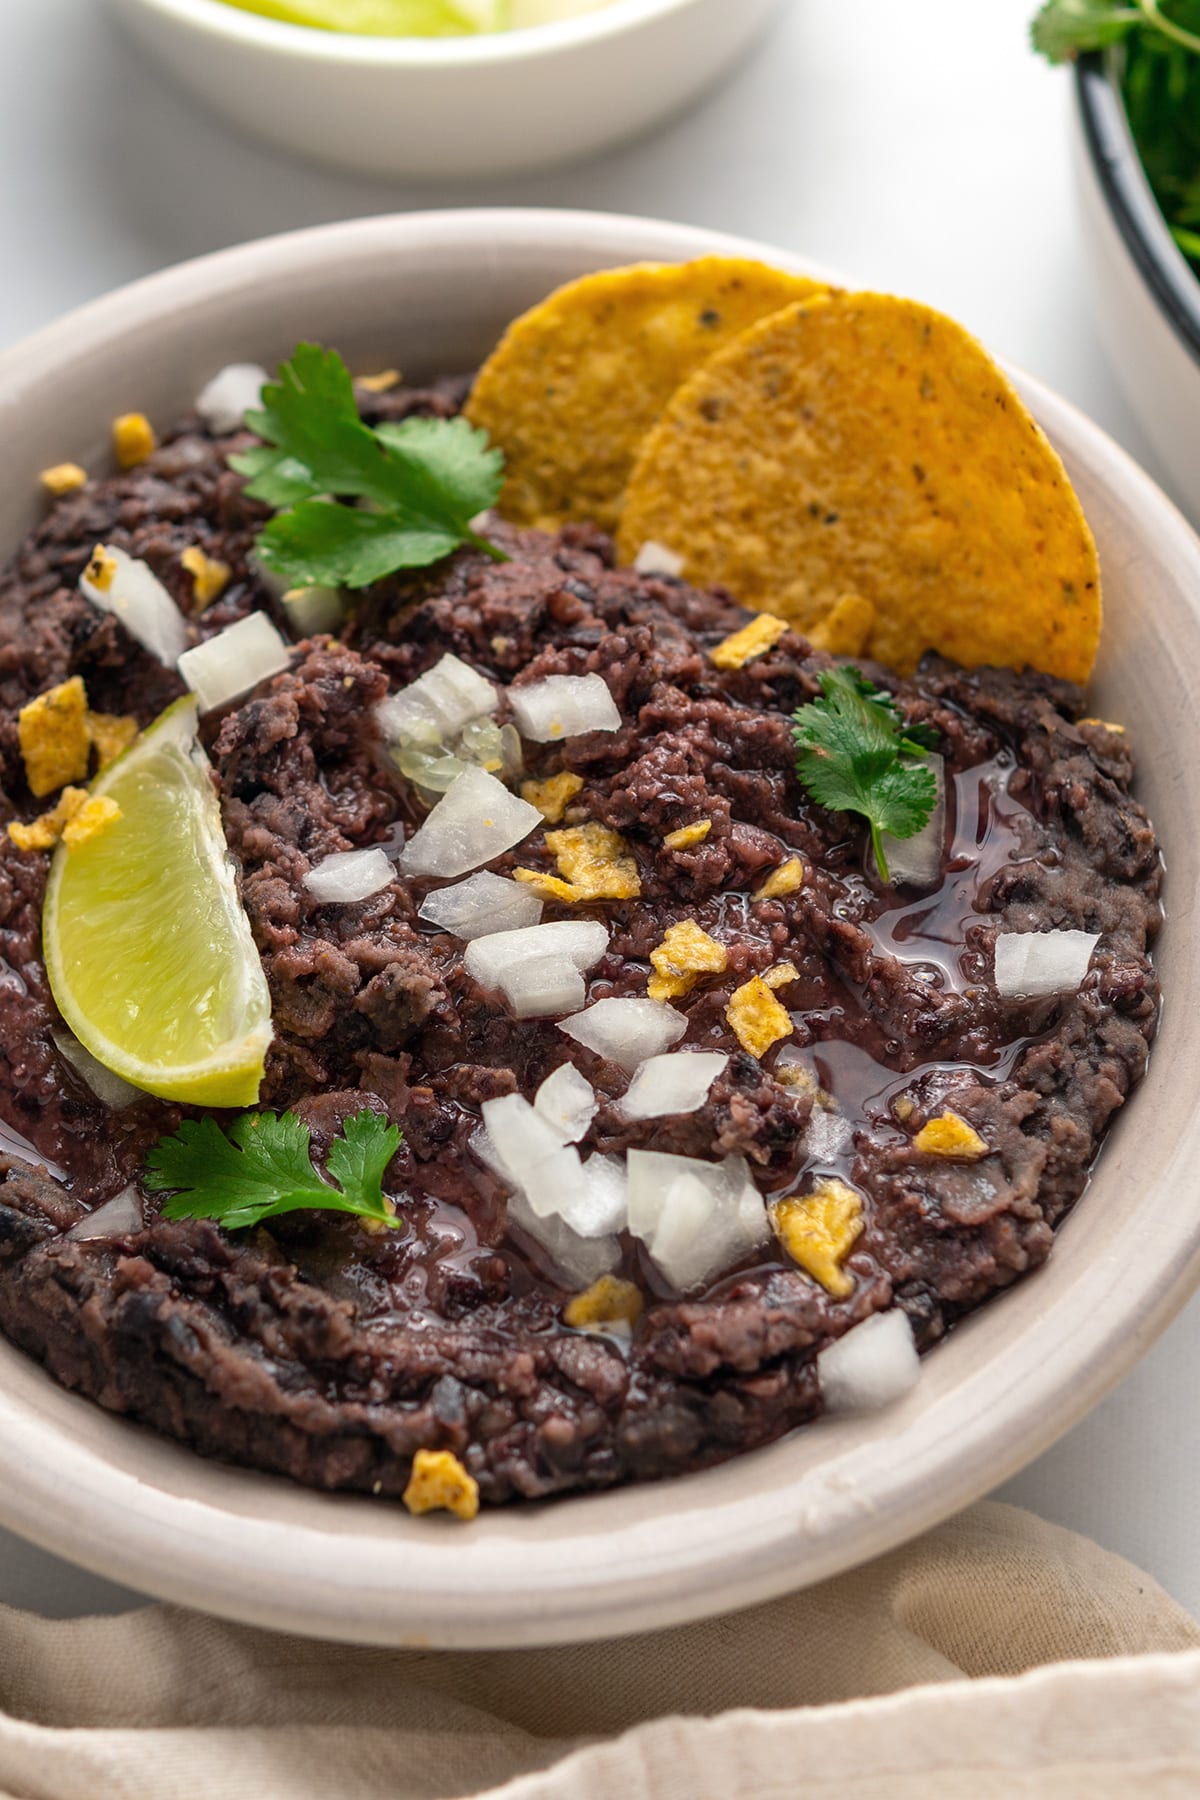 This Instant Pot Refried Beans recipe will teach you how to cook dry black beans and turn them into flavor-packed, creamy refried goodness using the Pressure Cooking and Saute functions. Serve as a dip or a side with your favorite toppings and corn tortilla chips.